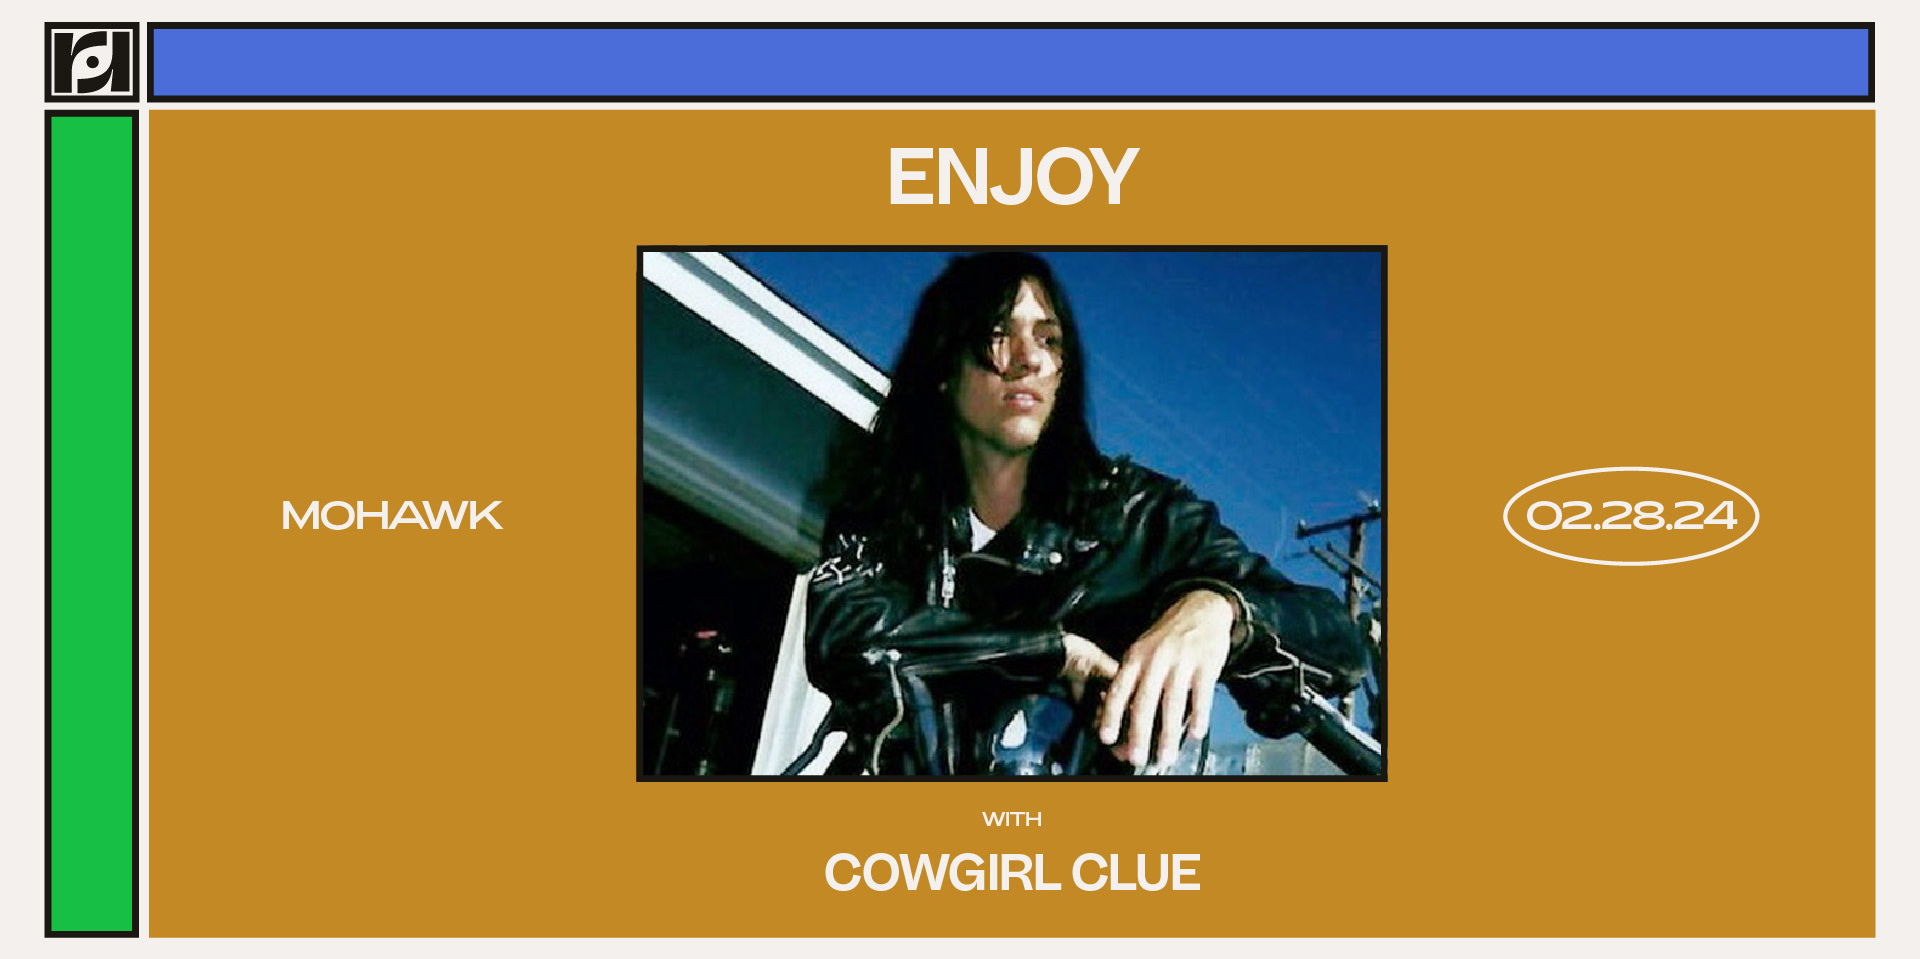 Resound Presents: Enjoy w/ Cowgirl Clue at Mohawk promotional image